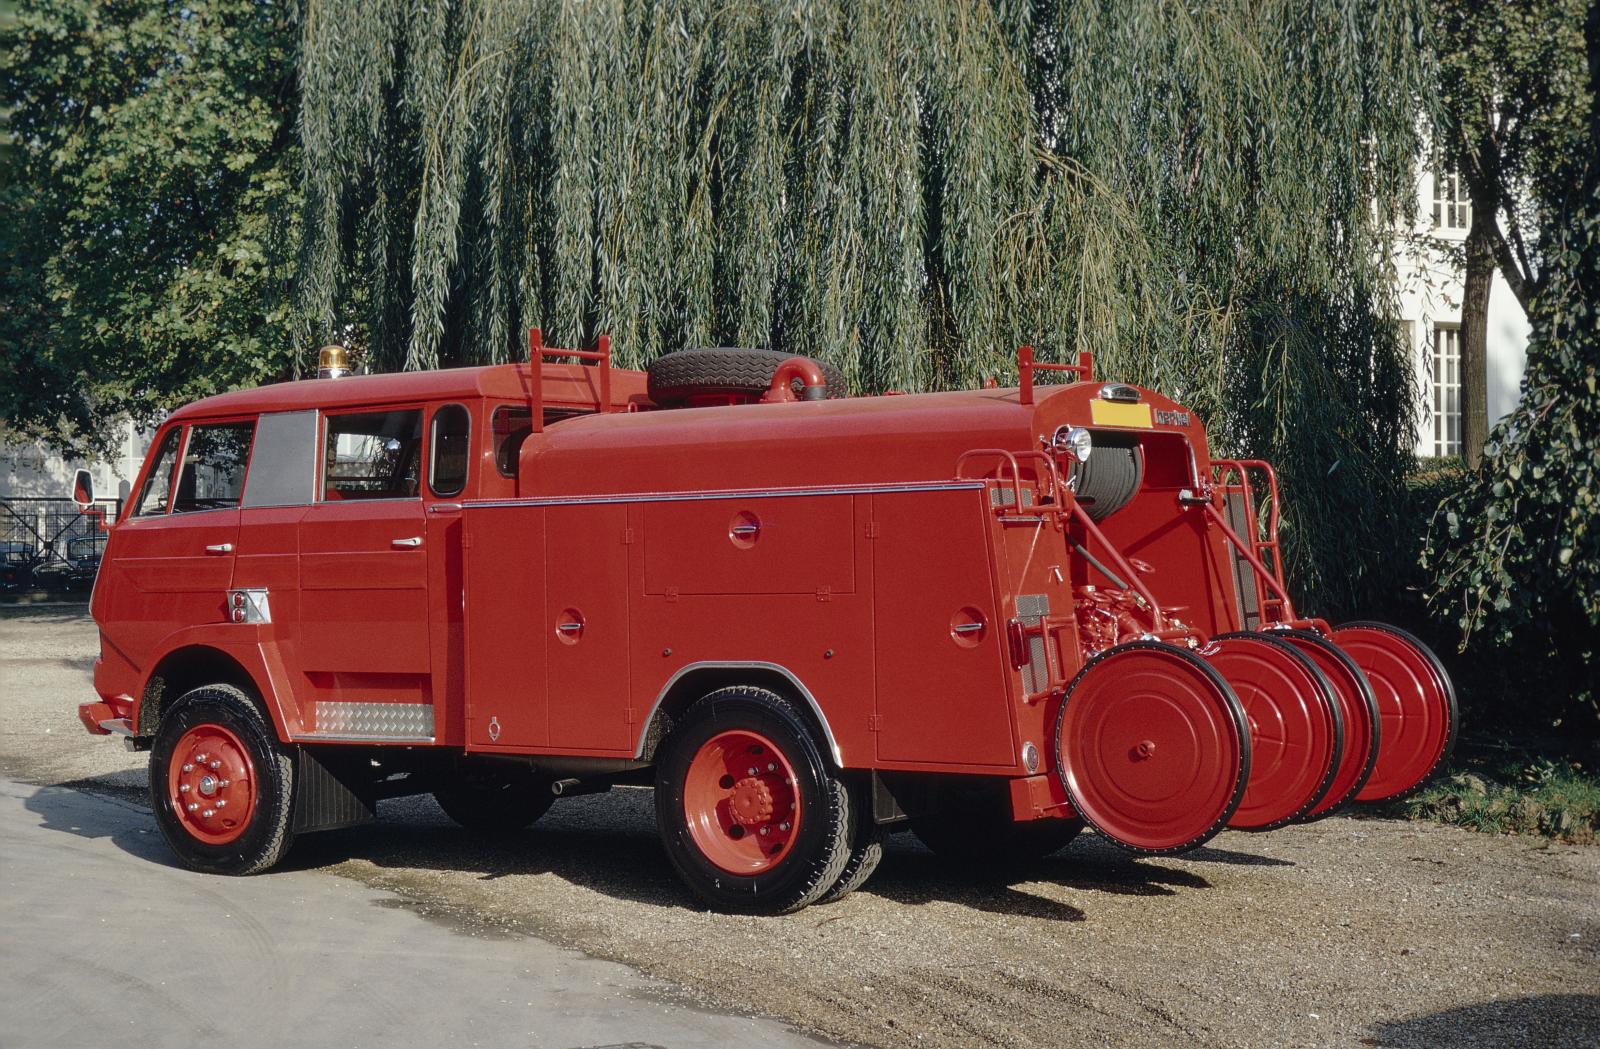 Type 350 Firefighters - 1968